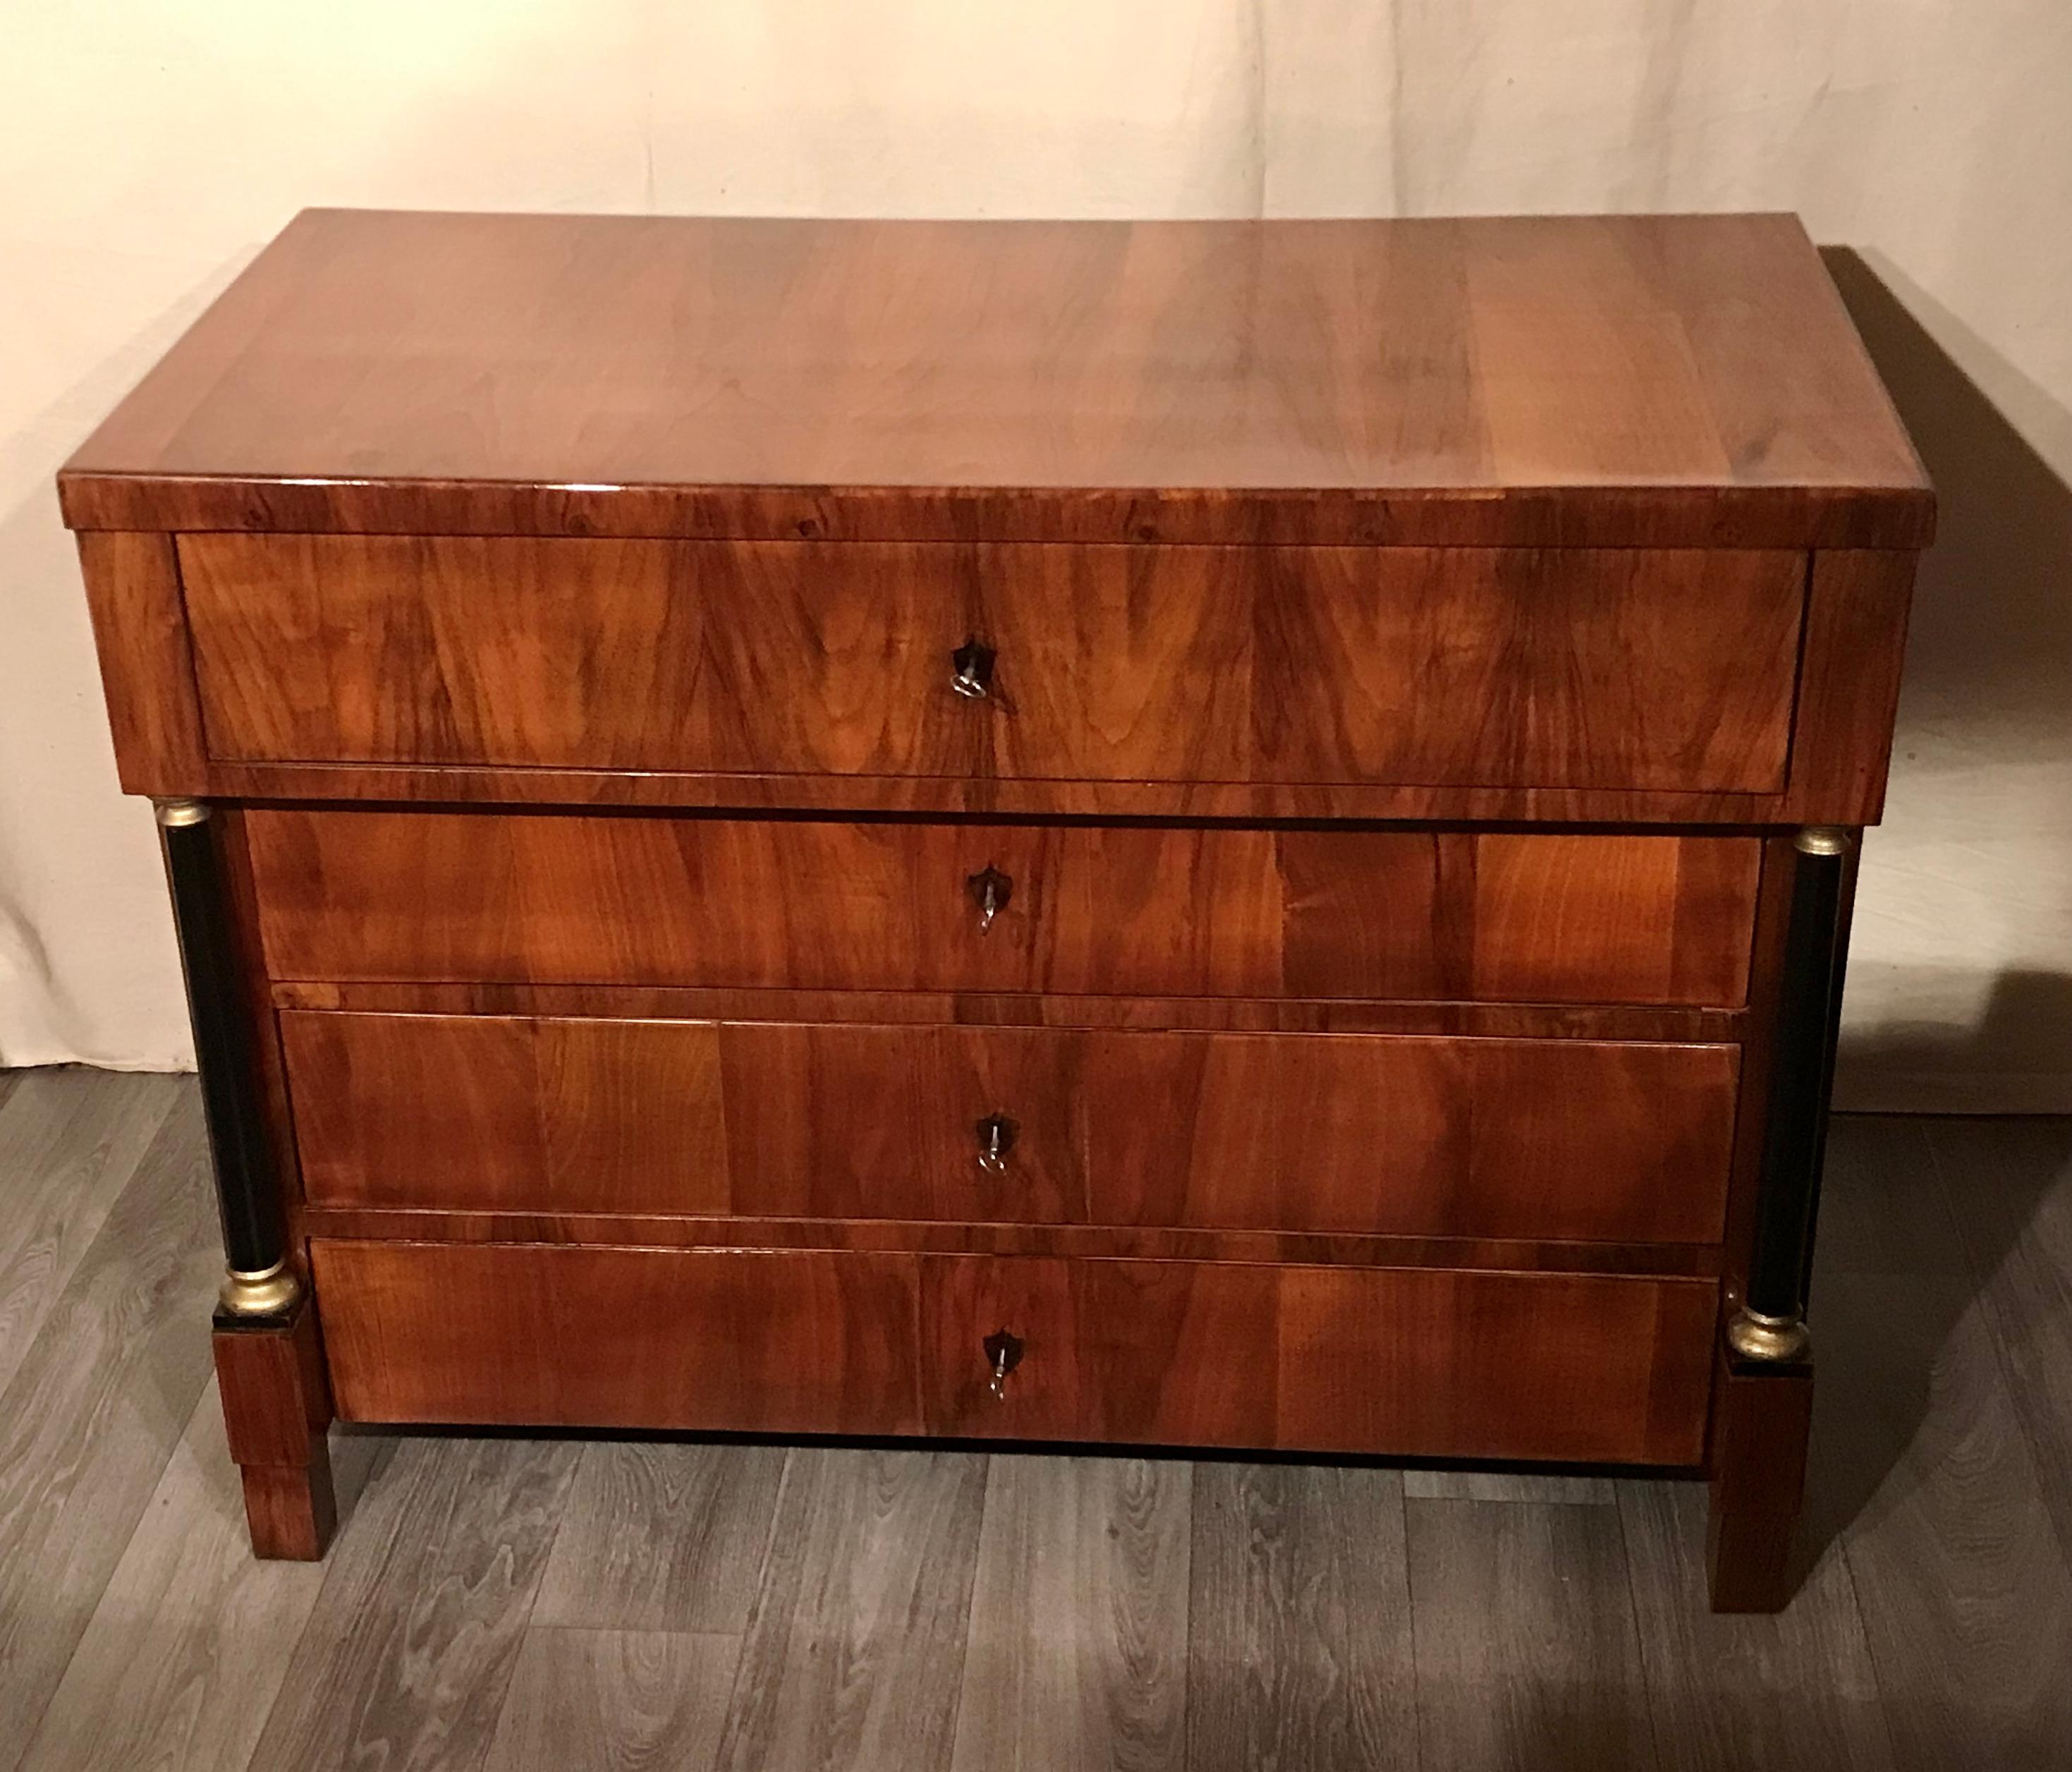 This elegant original Biedermeier chest of drawers dates back to around 1820. It was made in southern Germany. The four drawer baker chest has a beautiful walnut veneer. A writing compartment is hiding behind the slightly protruding upper drawer.